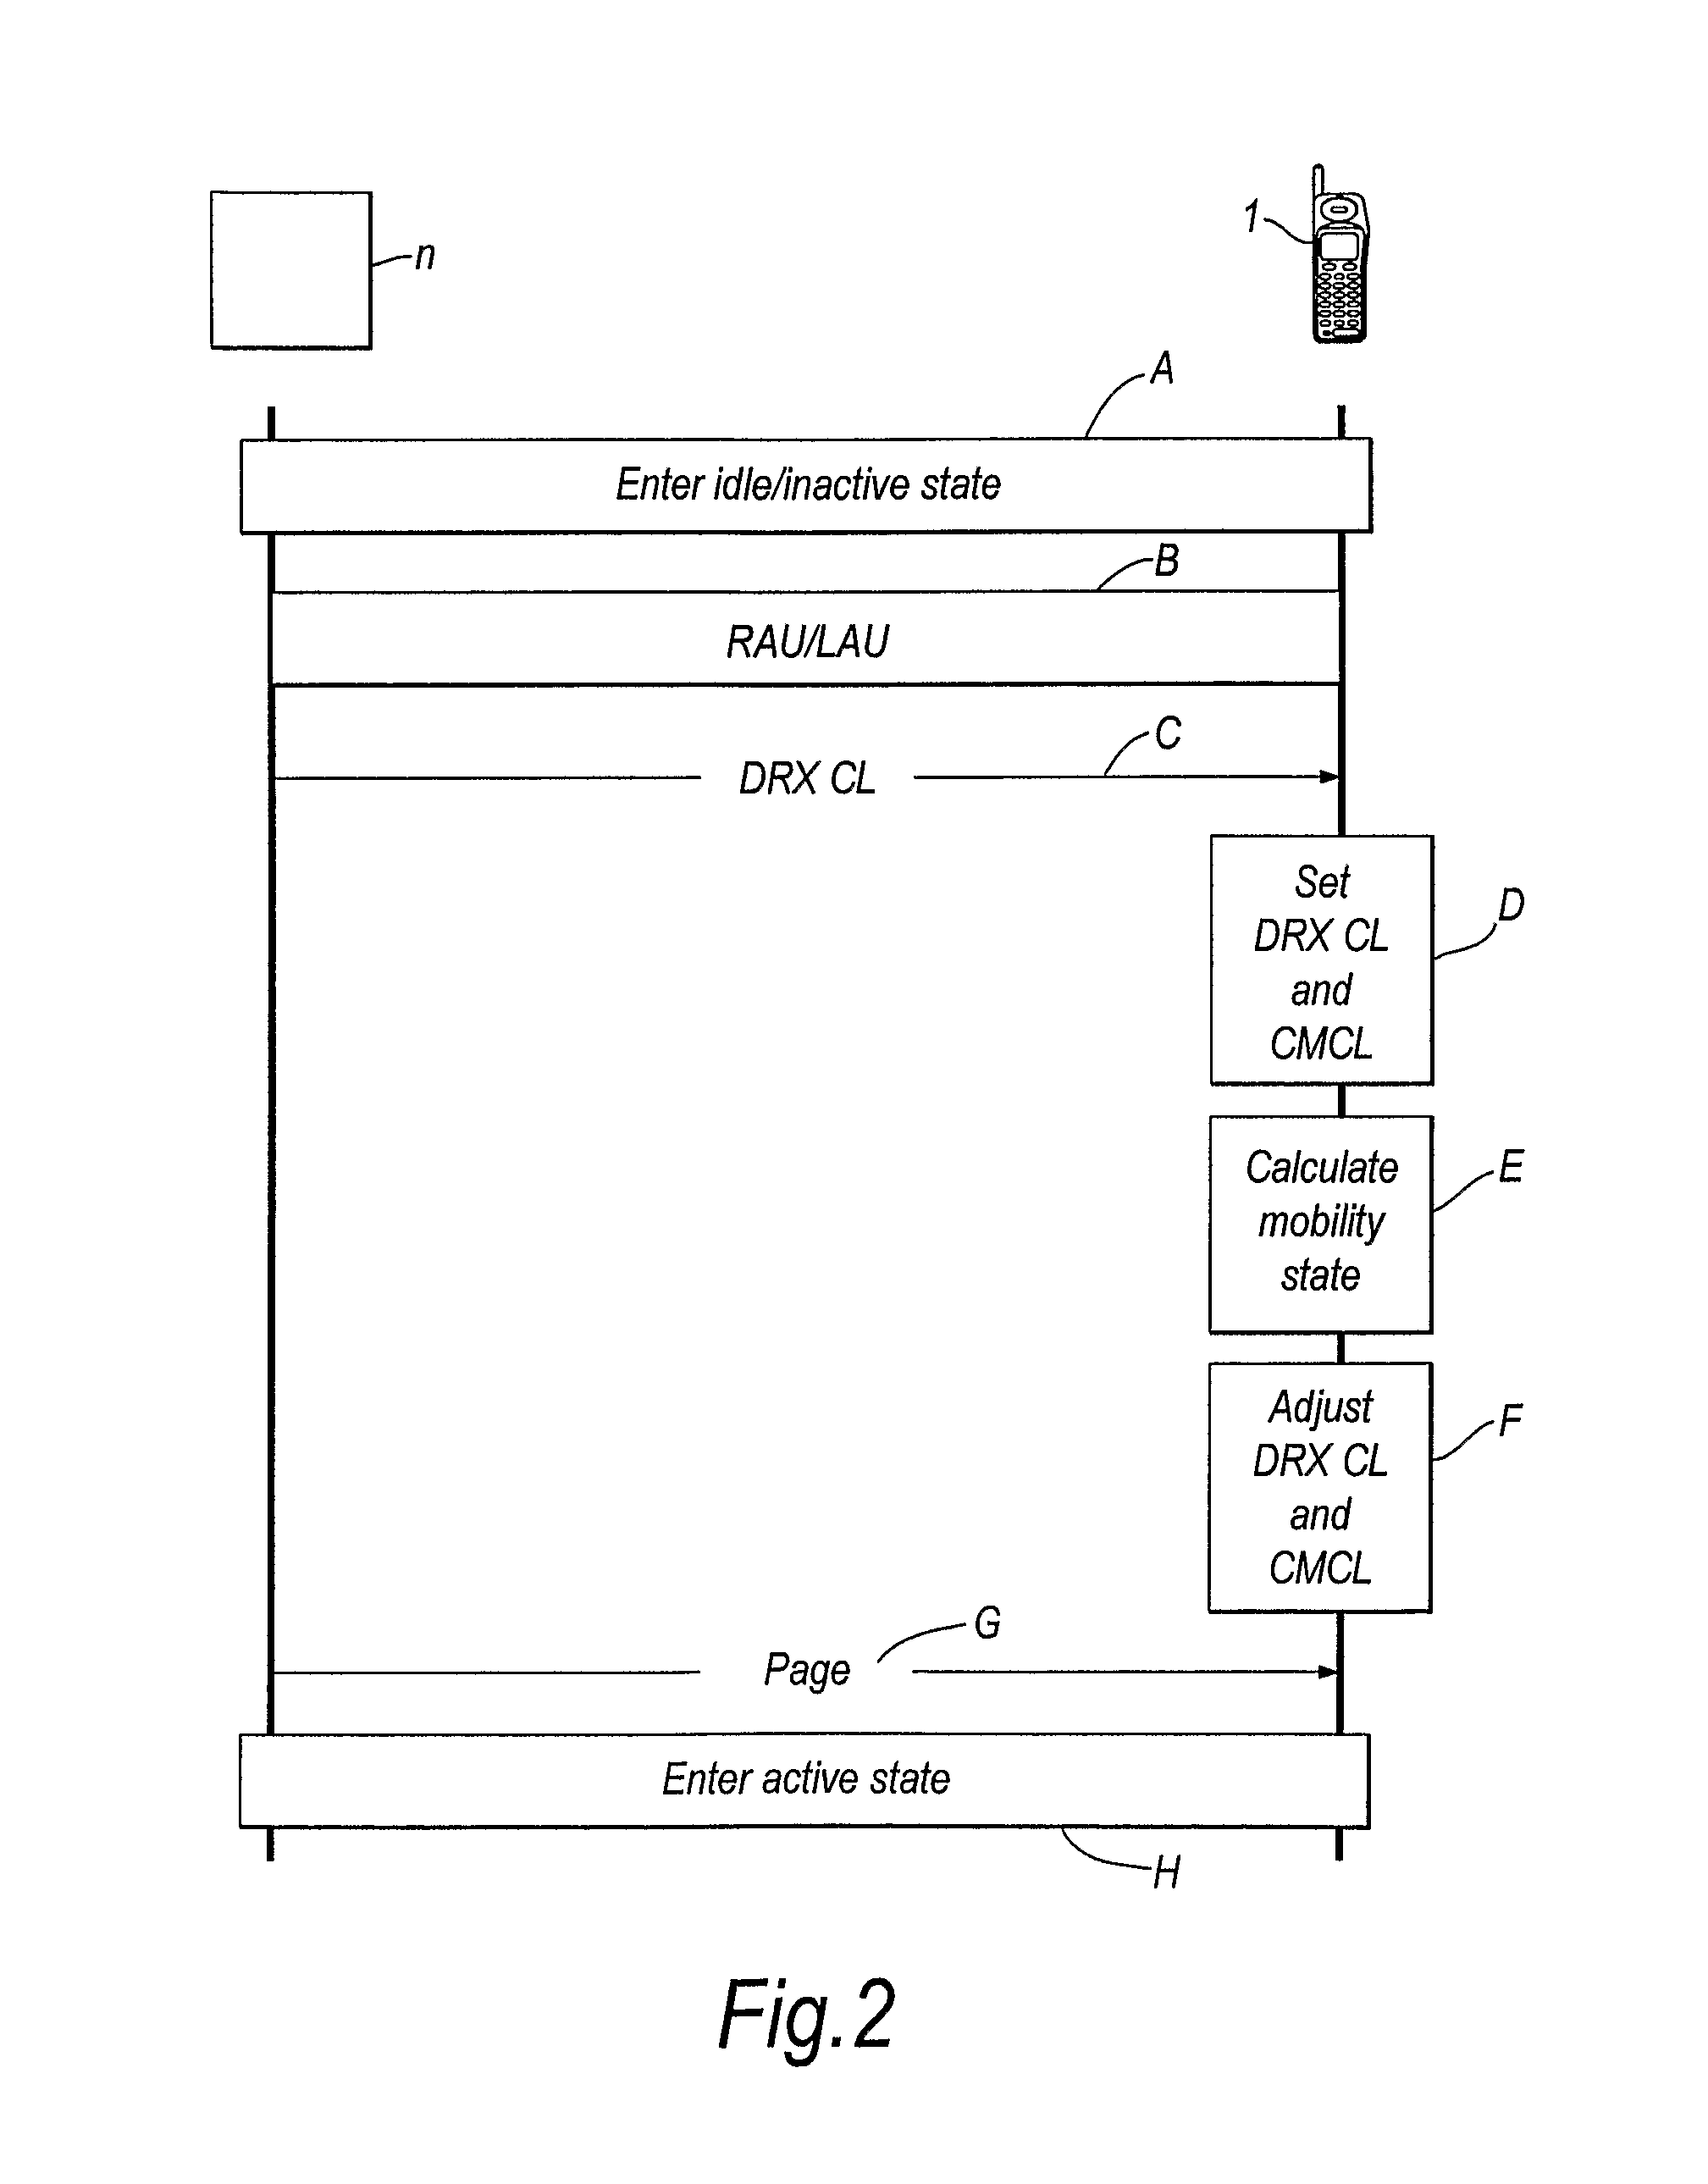 Network and Method for Optimizing Cell Reselection by Using an Estimation of Mobility of a Mobile Terminal